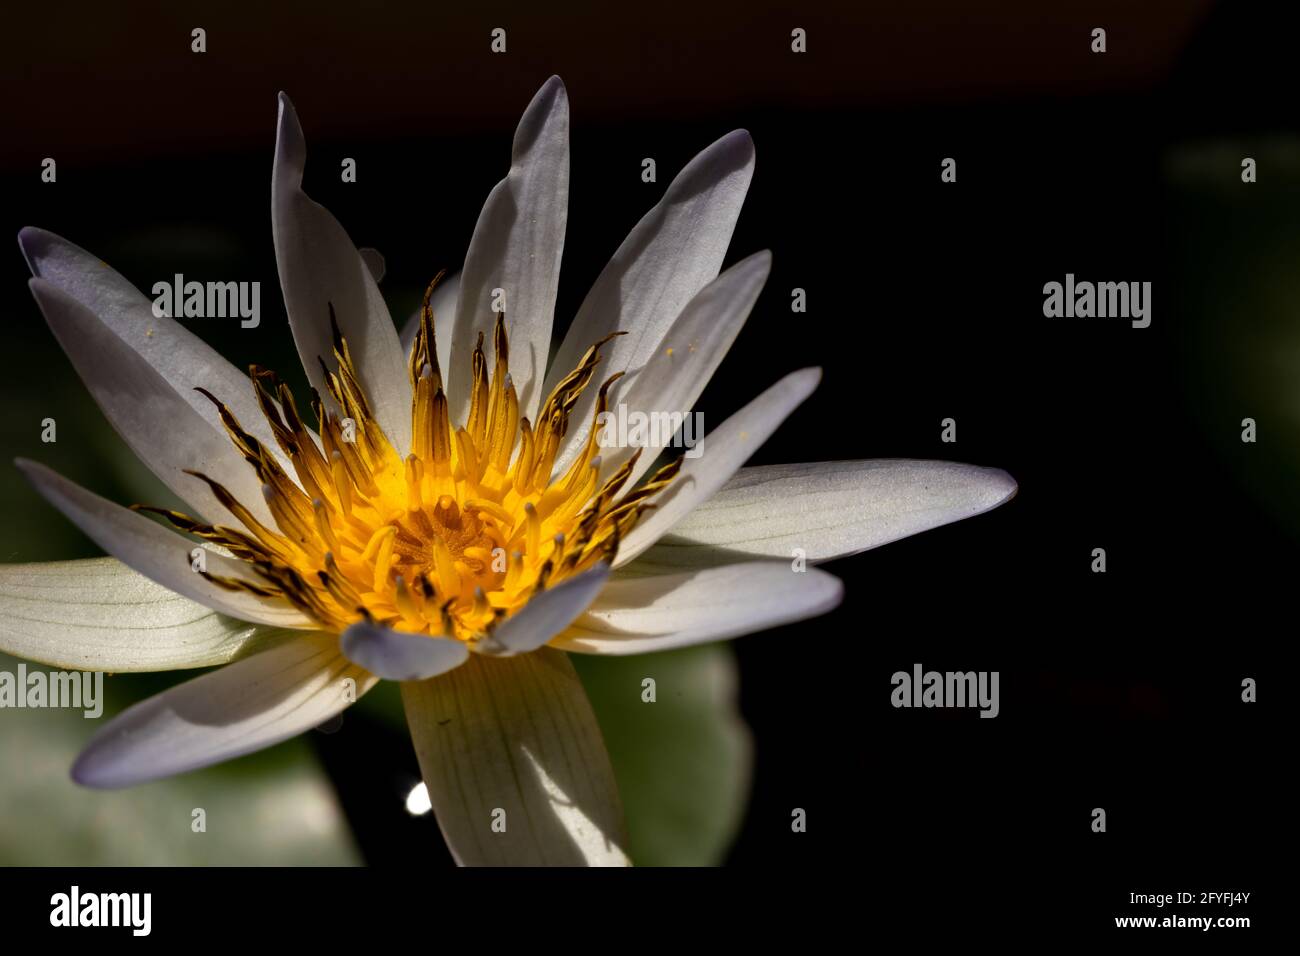 A water lily flower with yellow center and off white petals Stock Photo